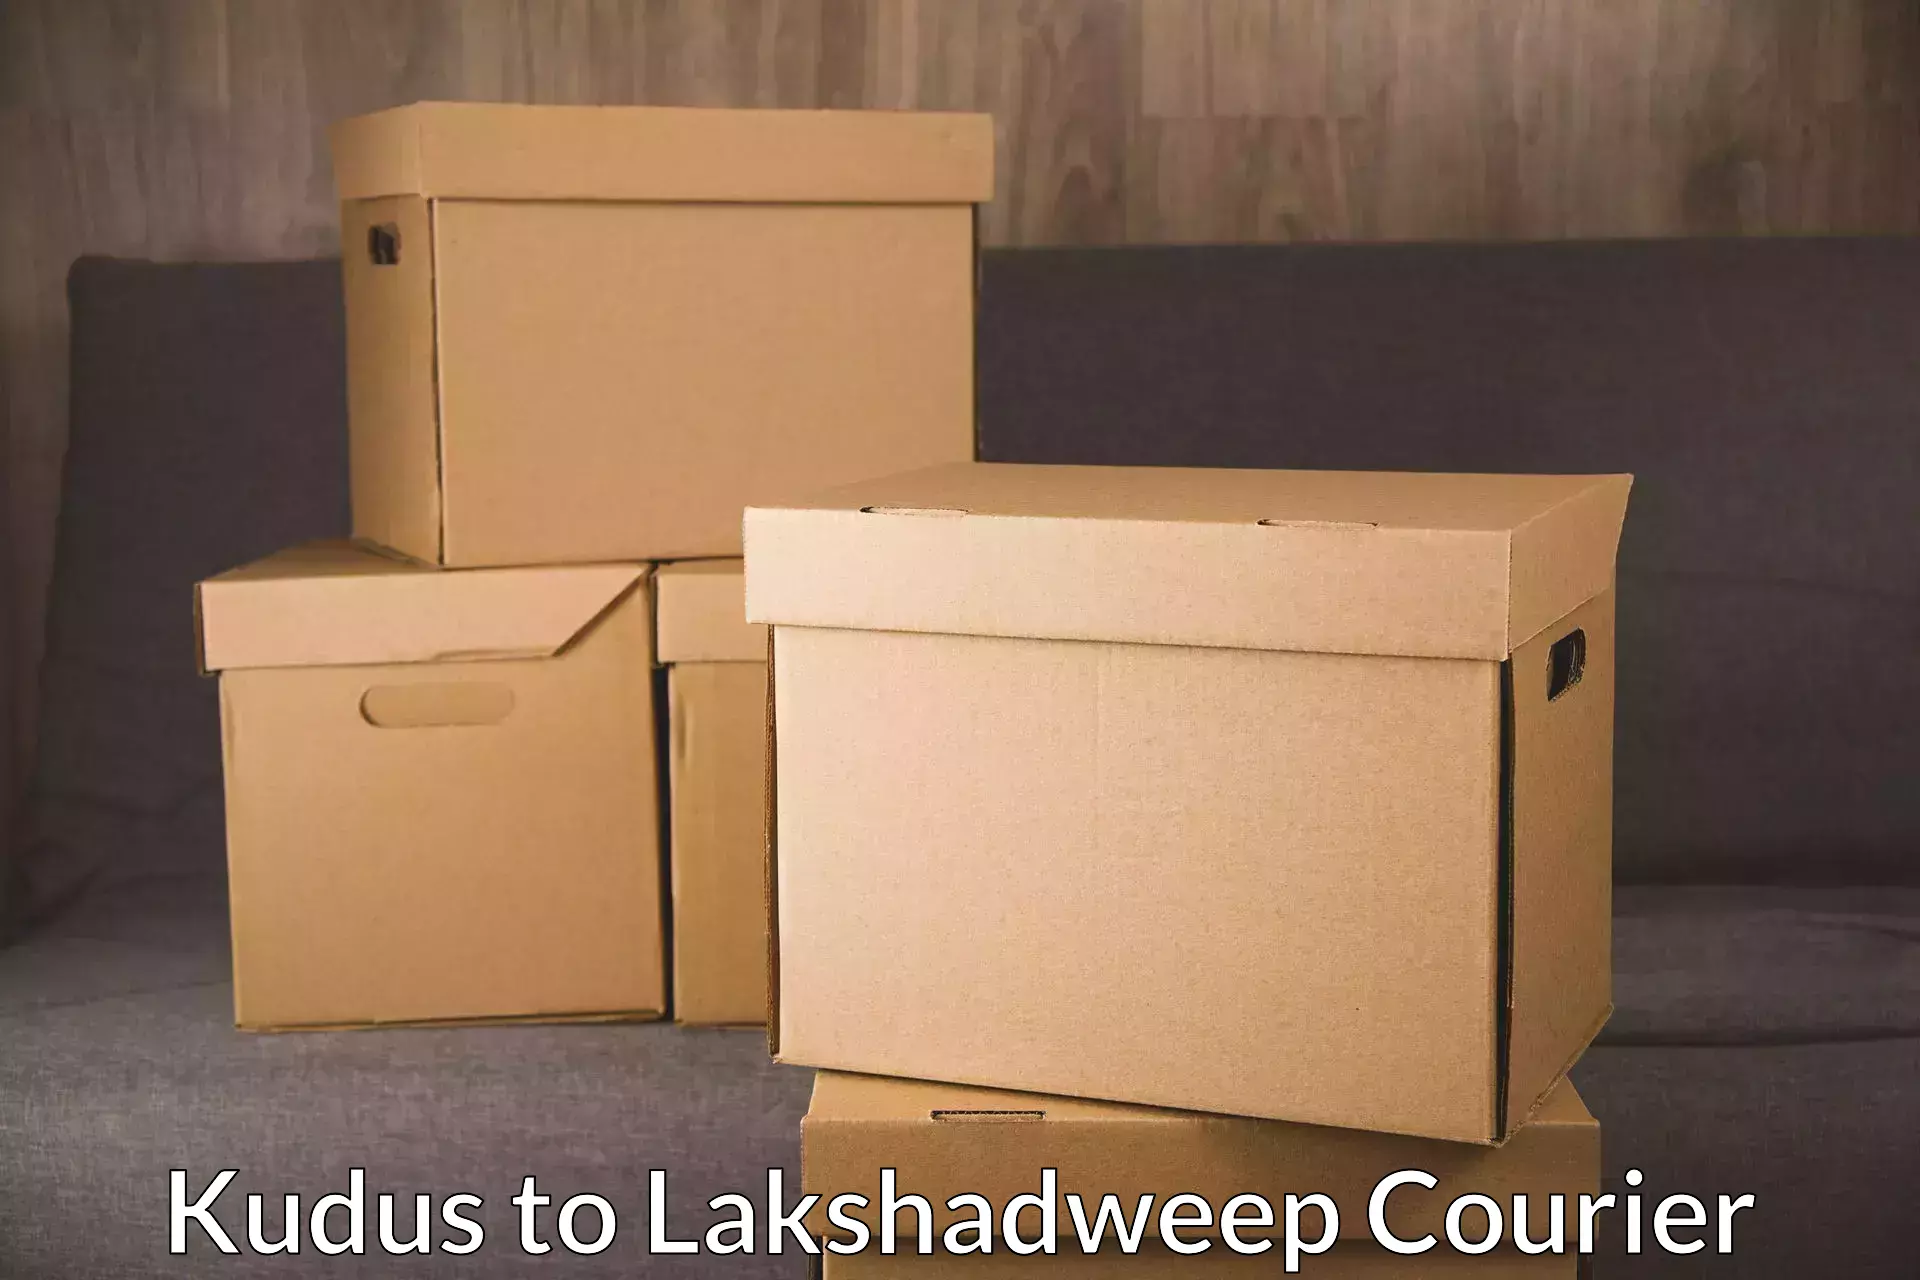 Modern courier technology Kudus to Lakshadweep